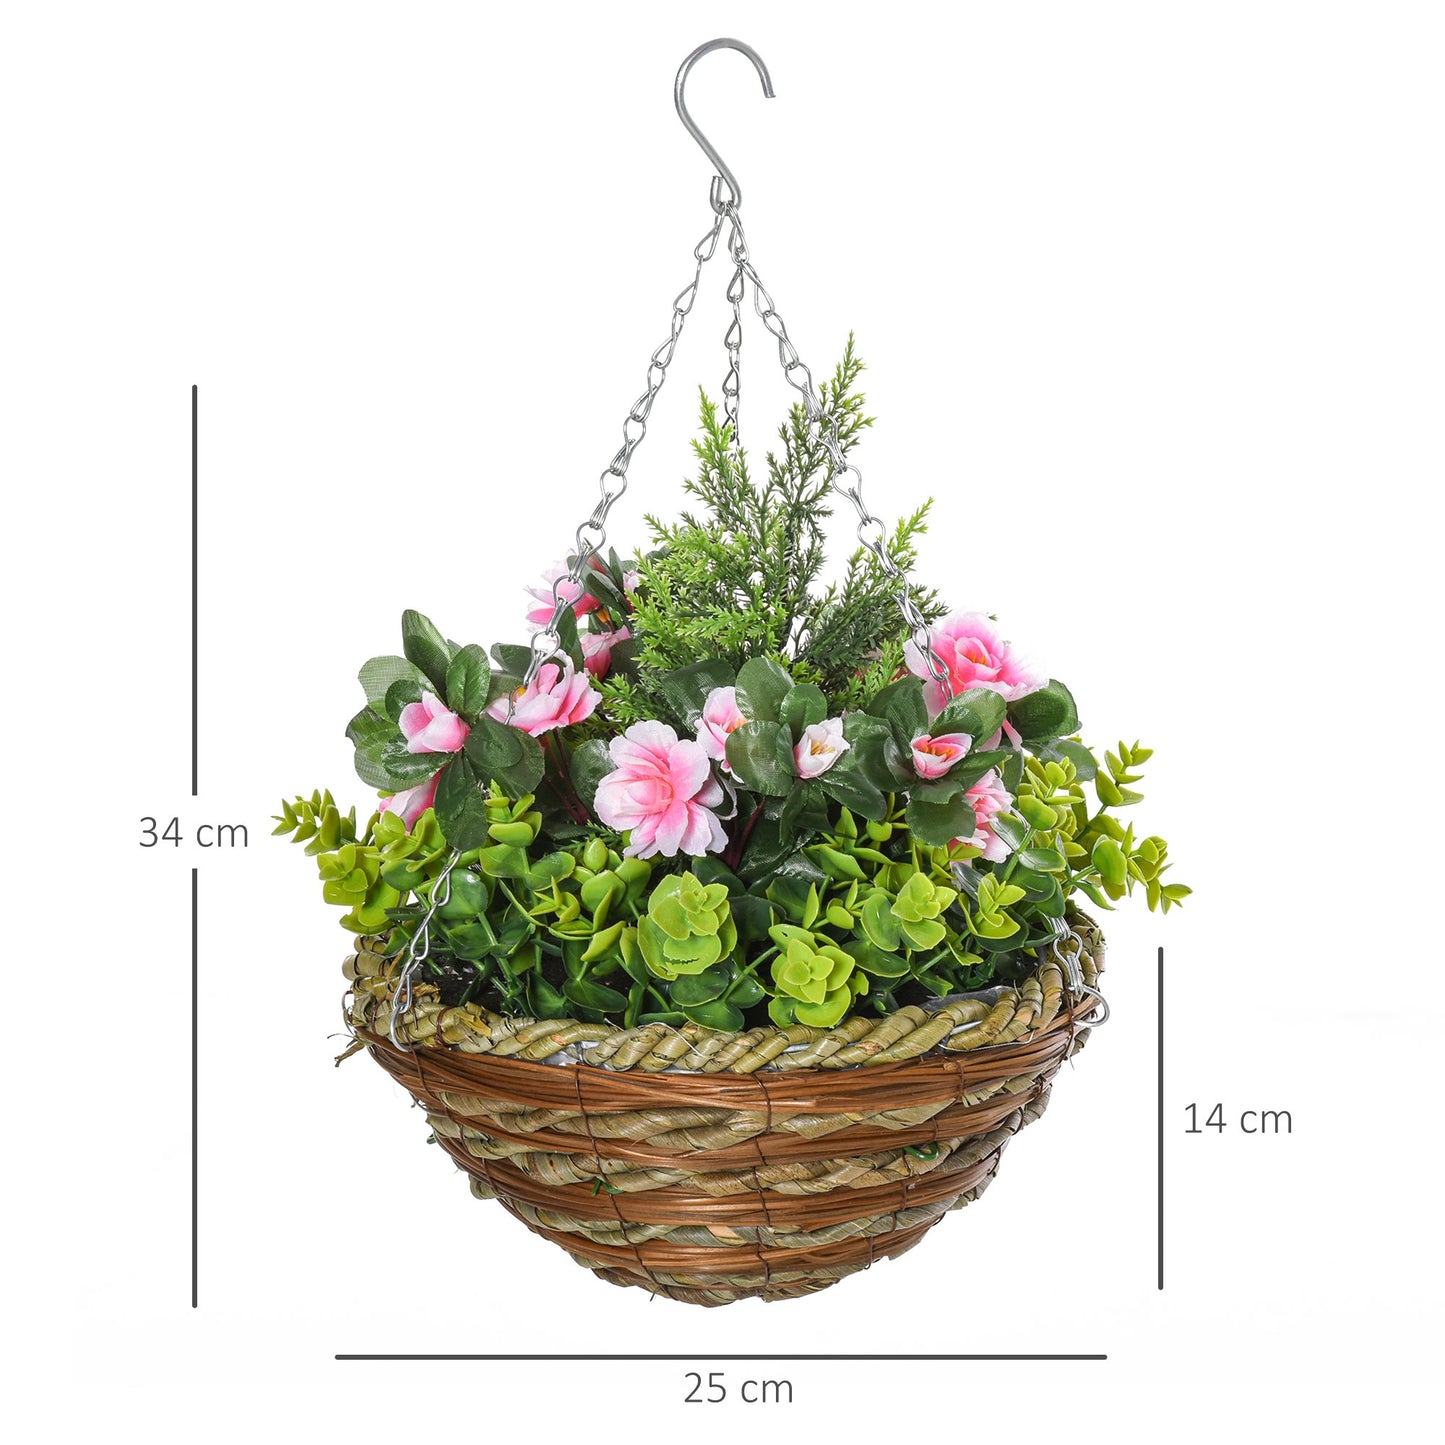 Outsunny Pack of 2 Artificial Lisianthus Flowers Hanging Planter with Basket for Indoor Outdoor Decoration